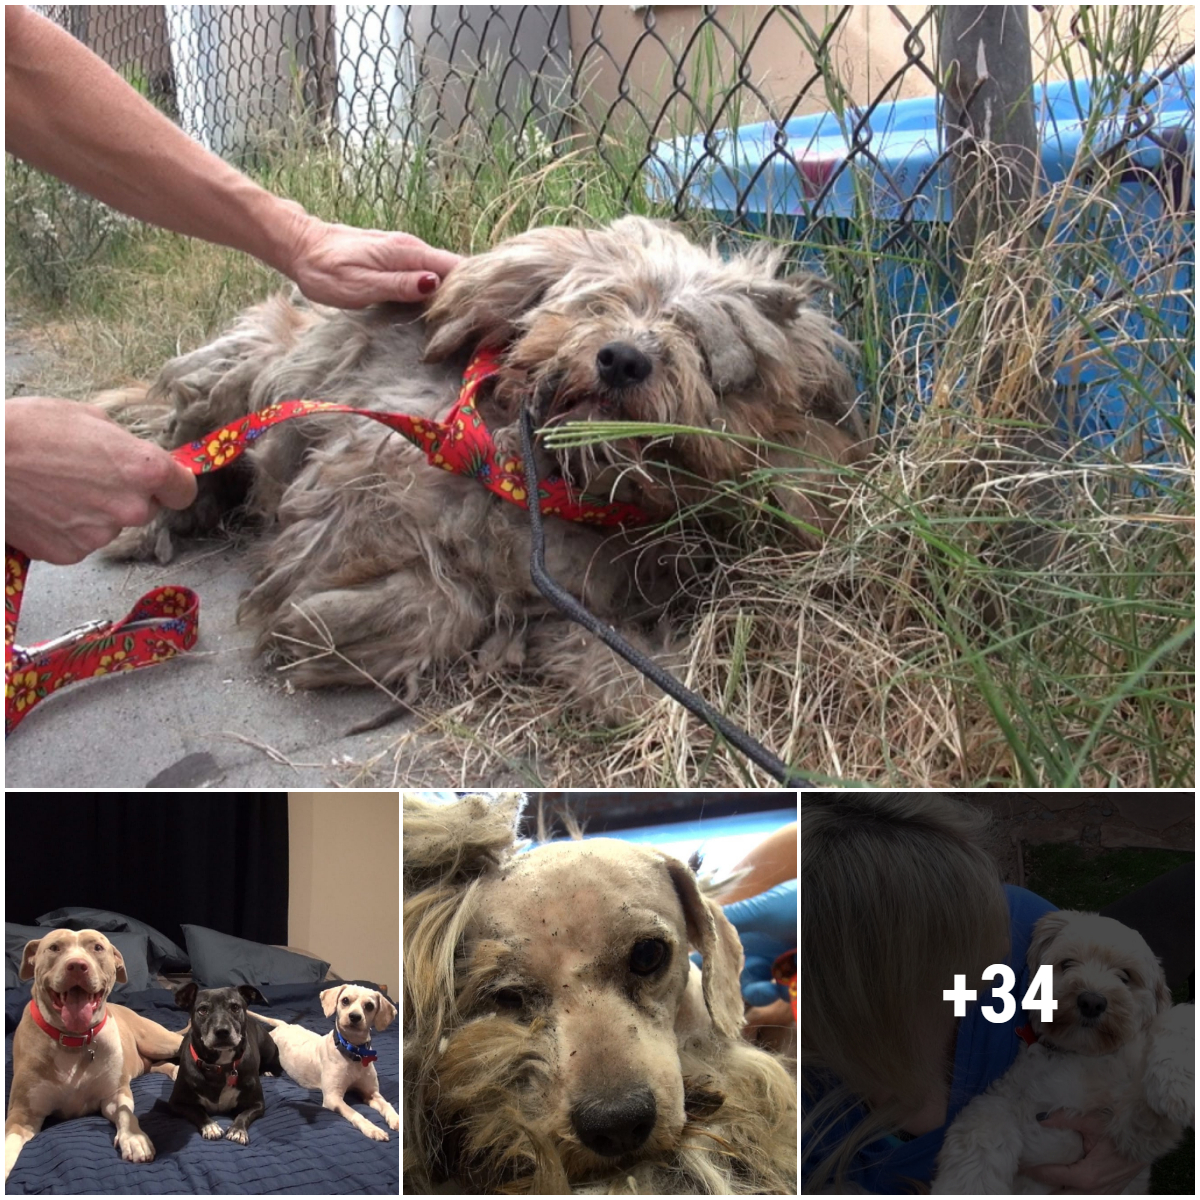 After being found, a stray dog with shaggy fur was fully shaved bald!